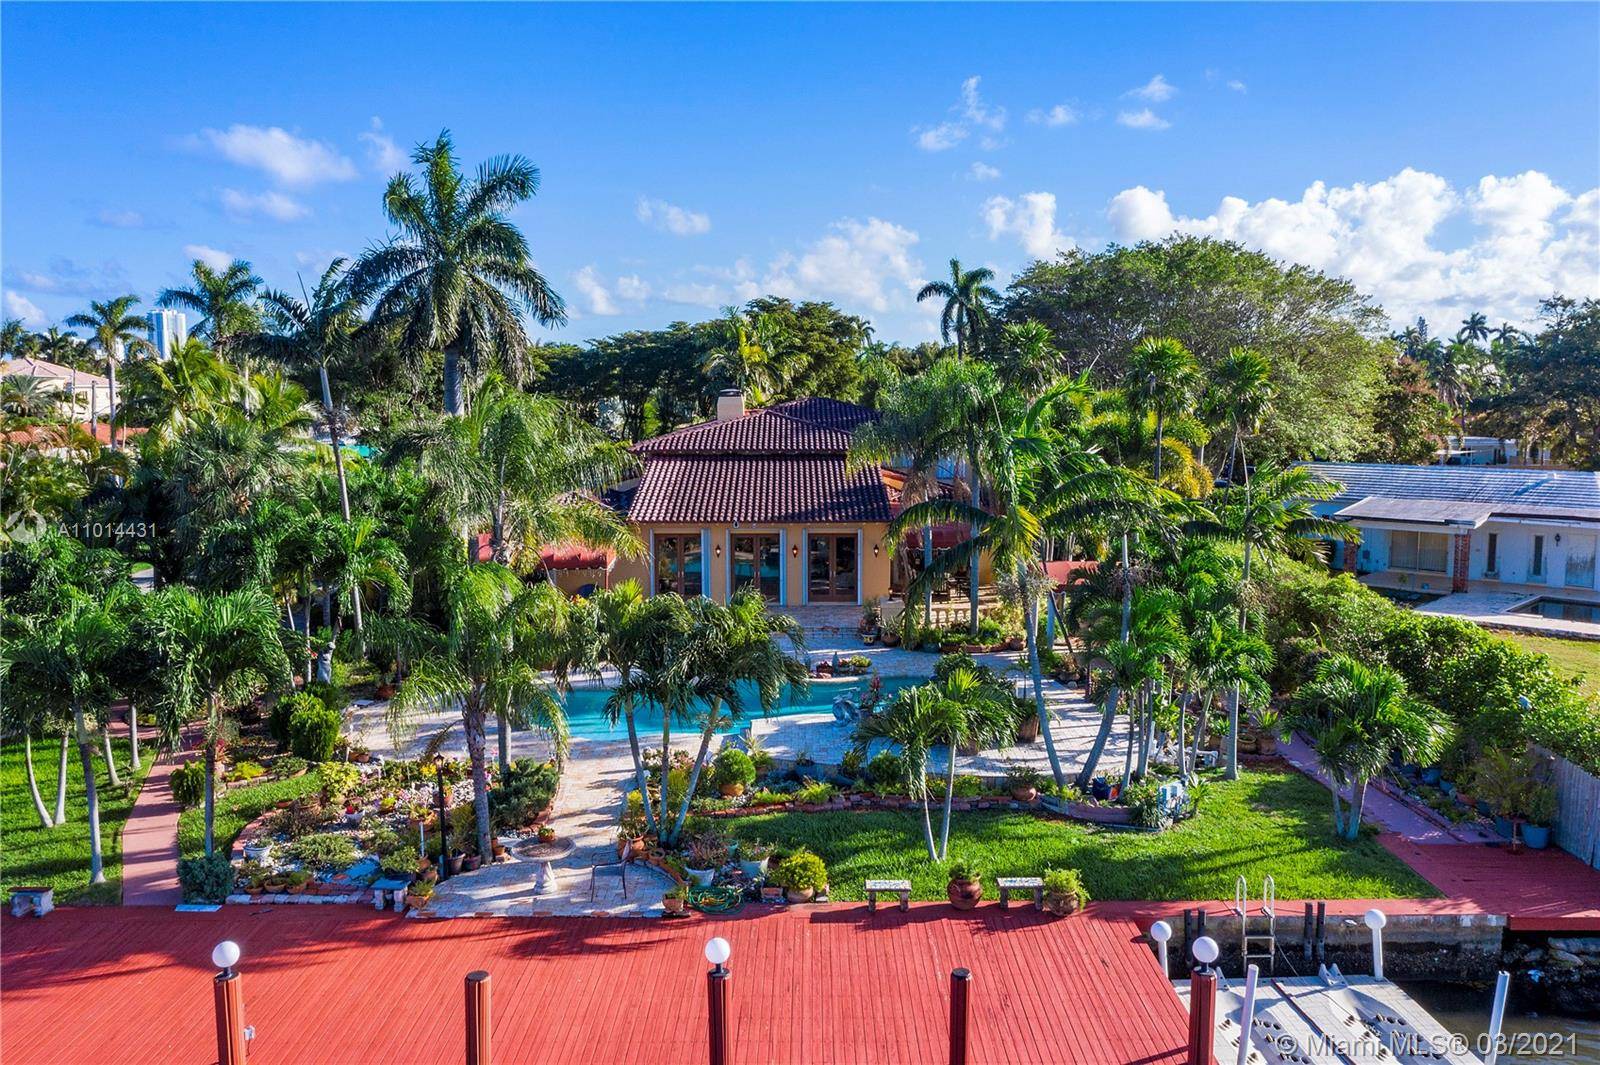 Dramatic Waterfront 4 4 5, 000 sf Mediterranean villa with wide water views and dock on large lot with resort style swimming pool, spa and tennis court surrounded by tropical ...